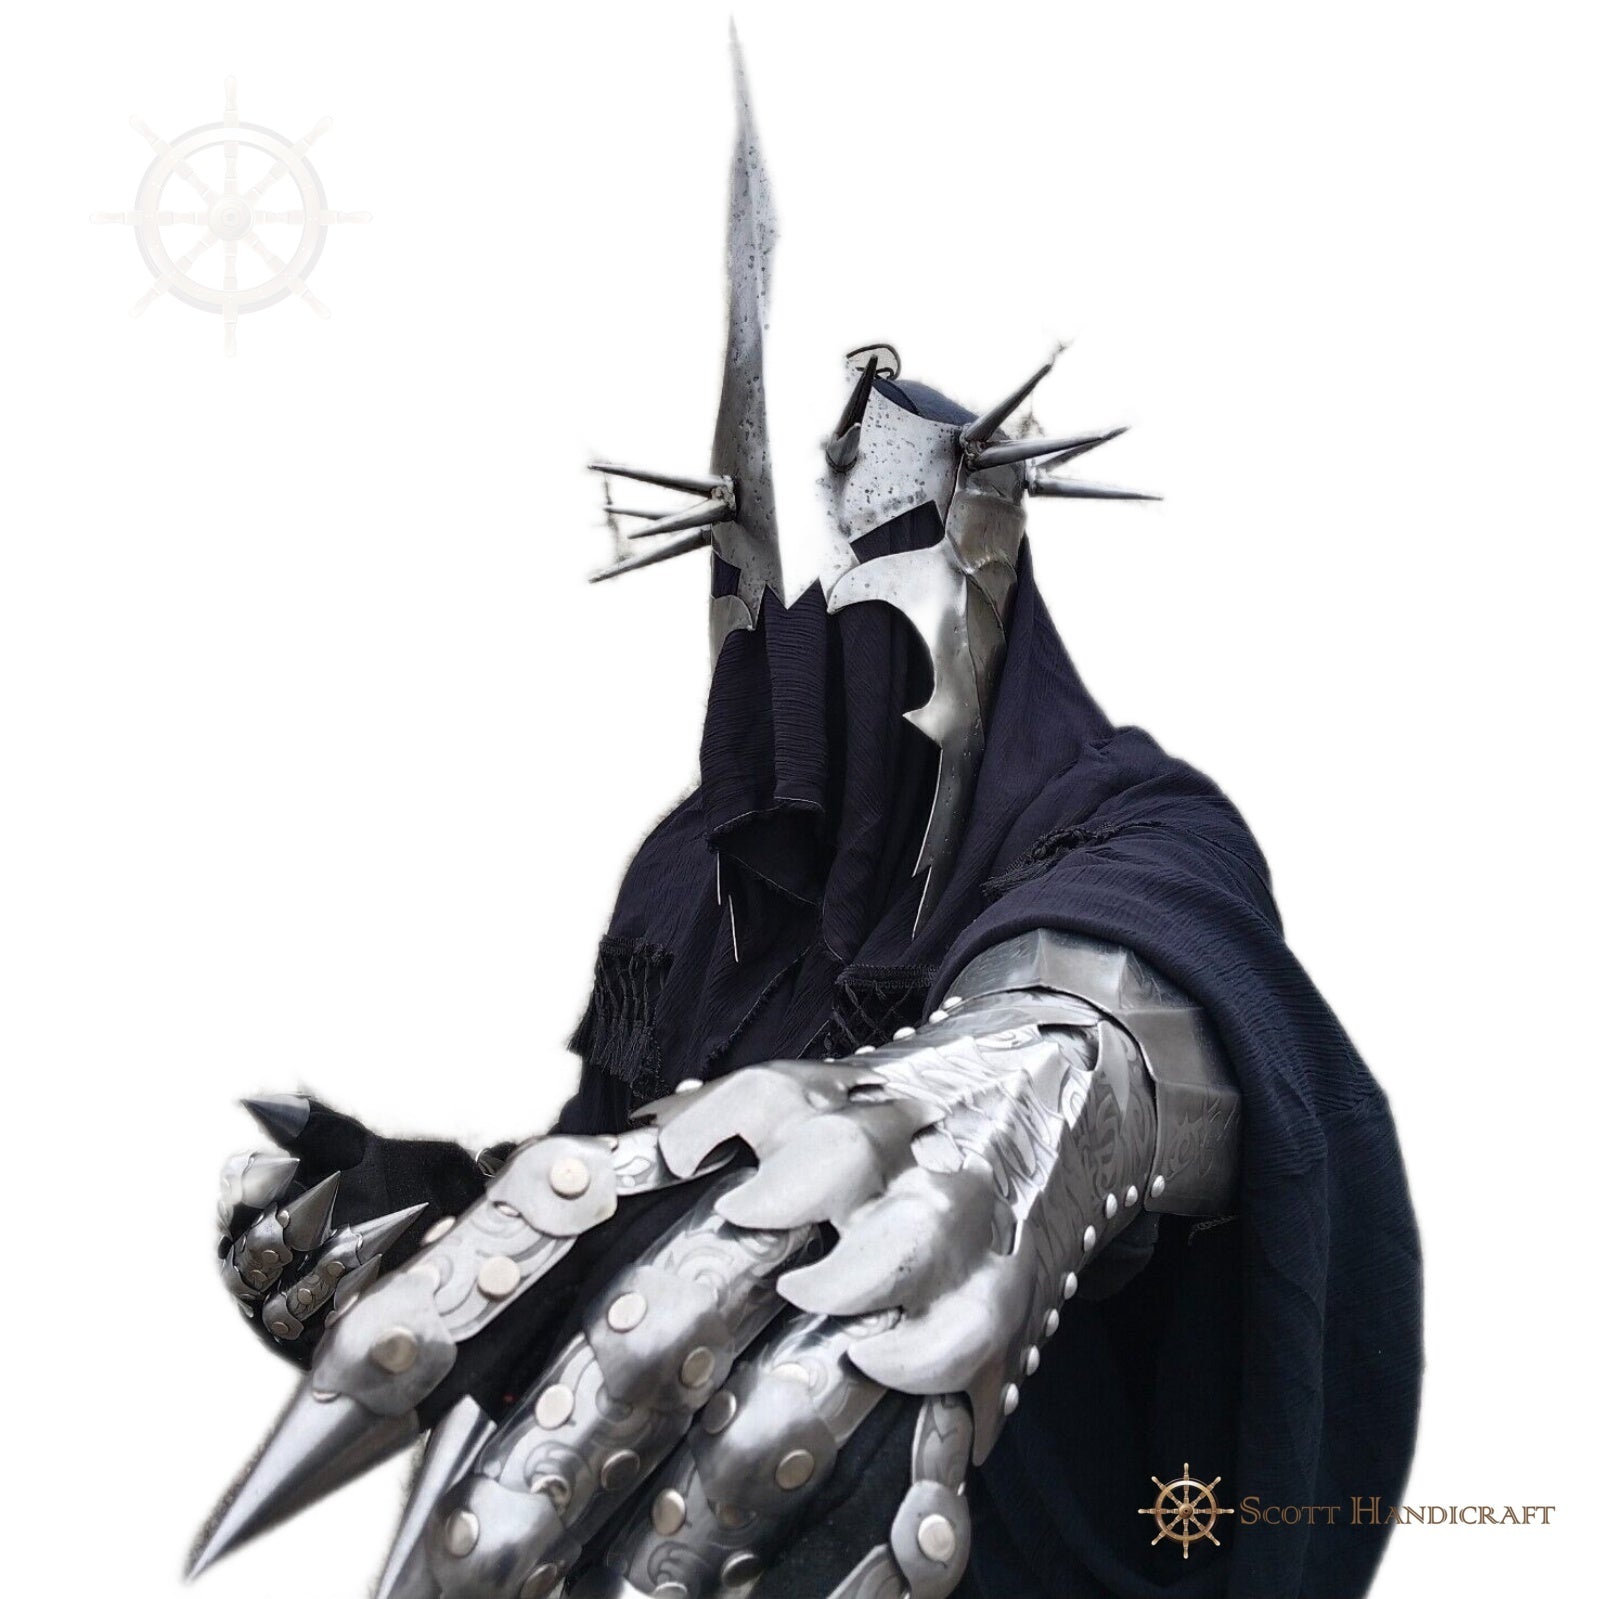 portrait of the witch king of angmar in brass armor